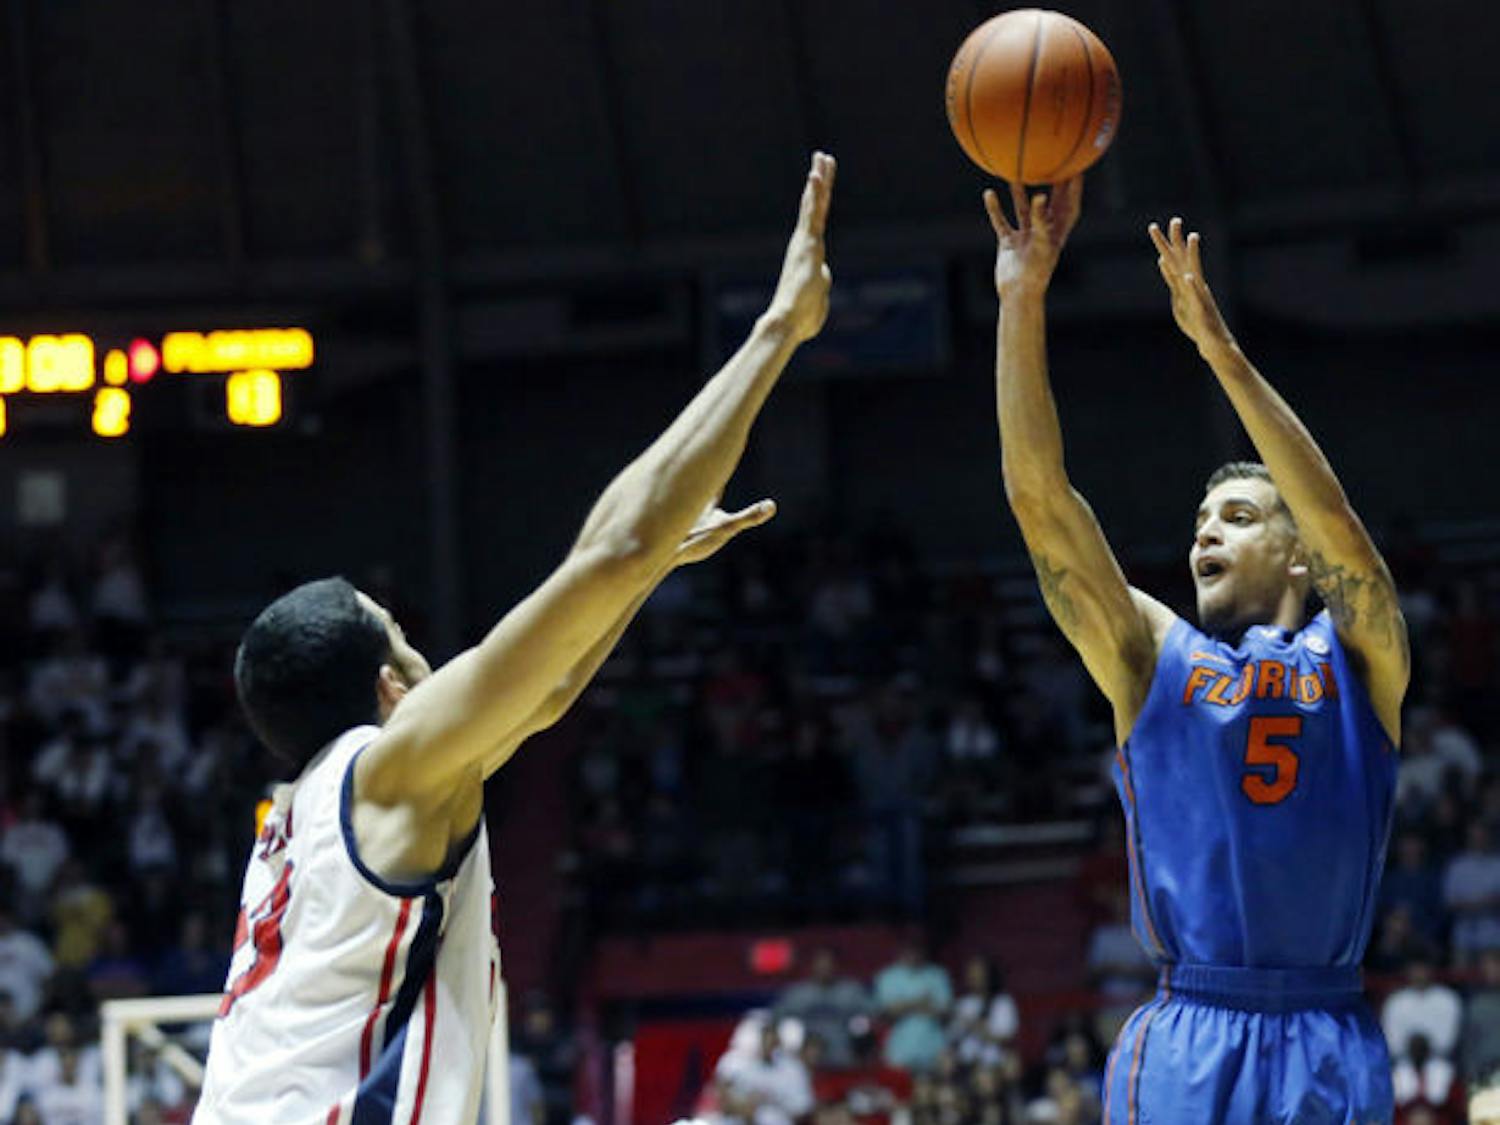 Scottie Wilbekin (5) attempts a shot as Ole Miss forward Anthony Perez (13) tries to block during Florida’s 75-71 win in Oxford, Miss., on Saturday. Wilbekin scored a team-high 18 points against the Rebels.